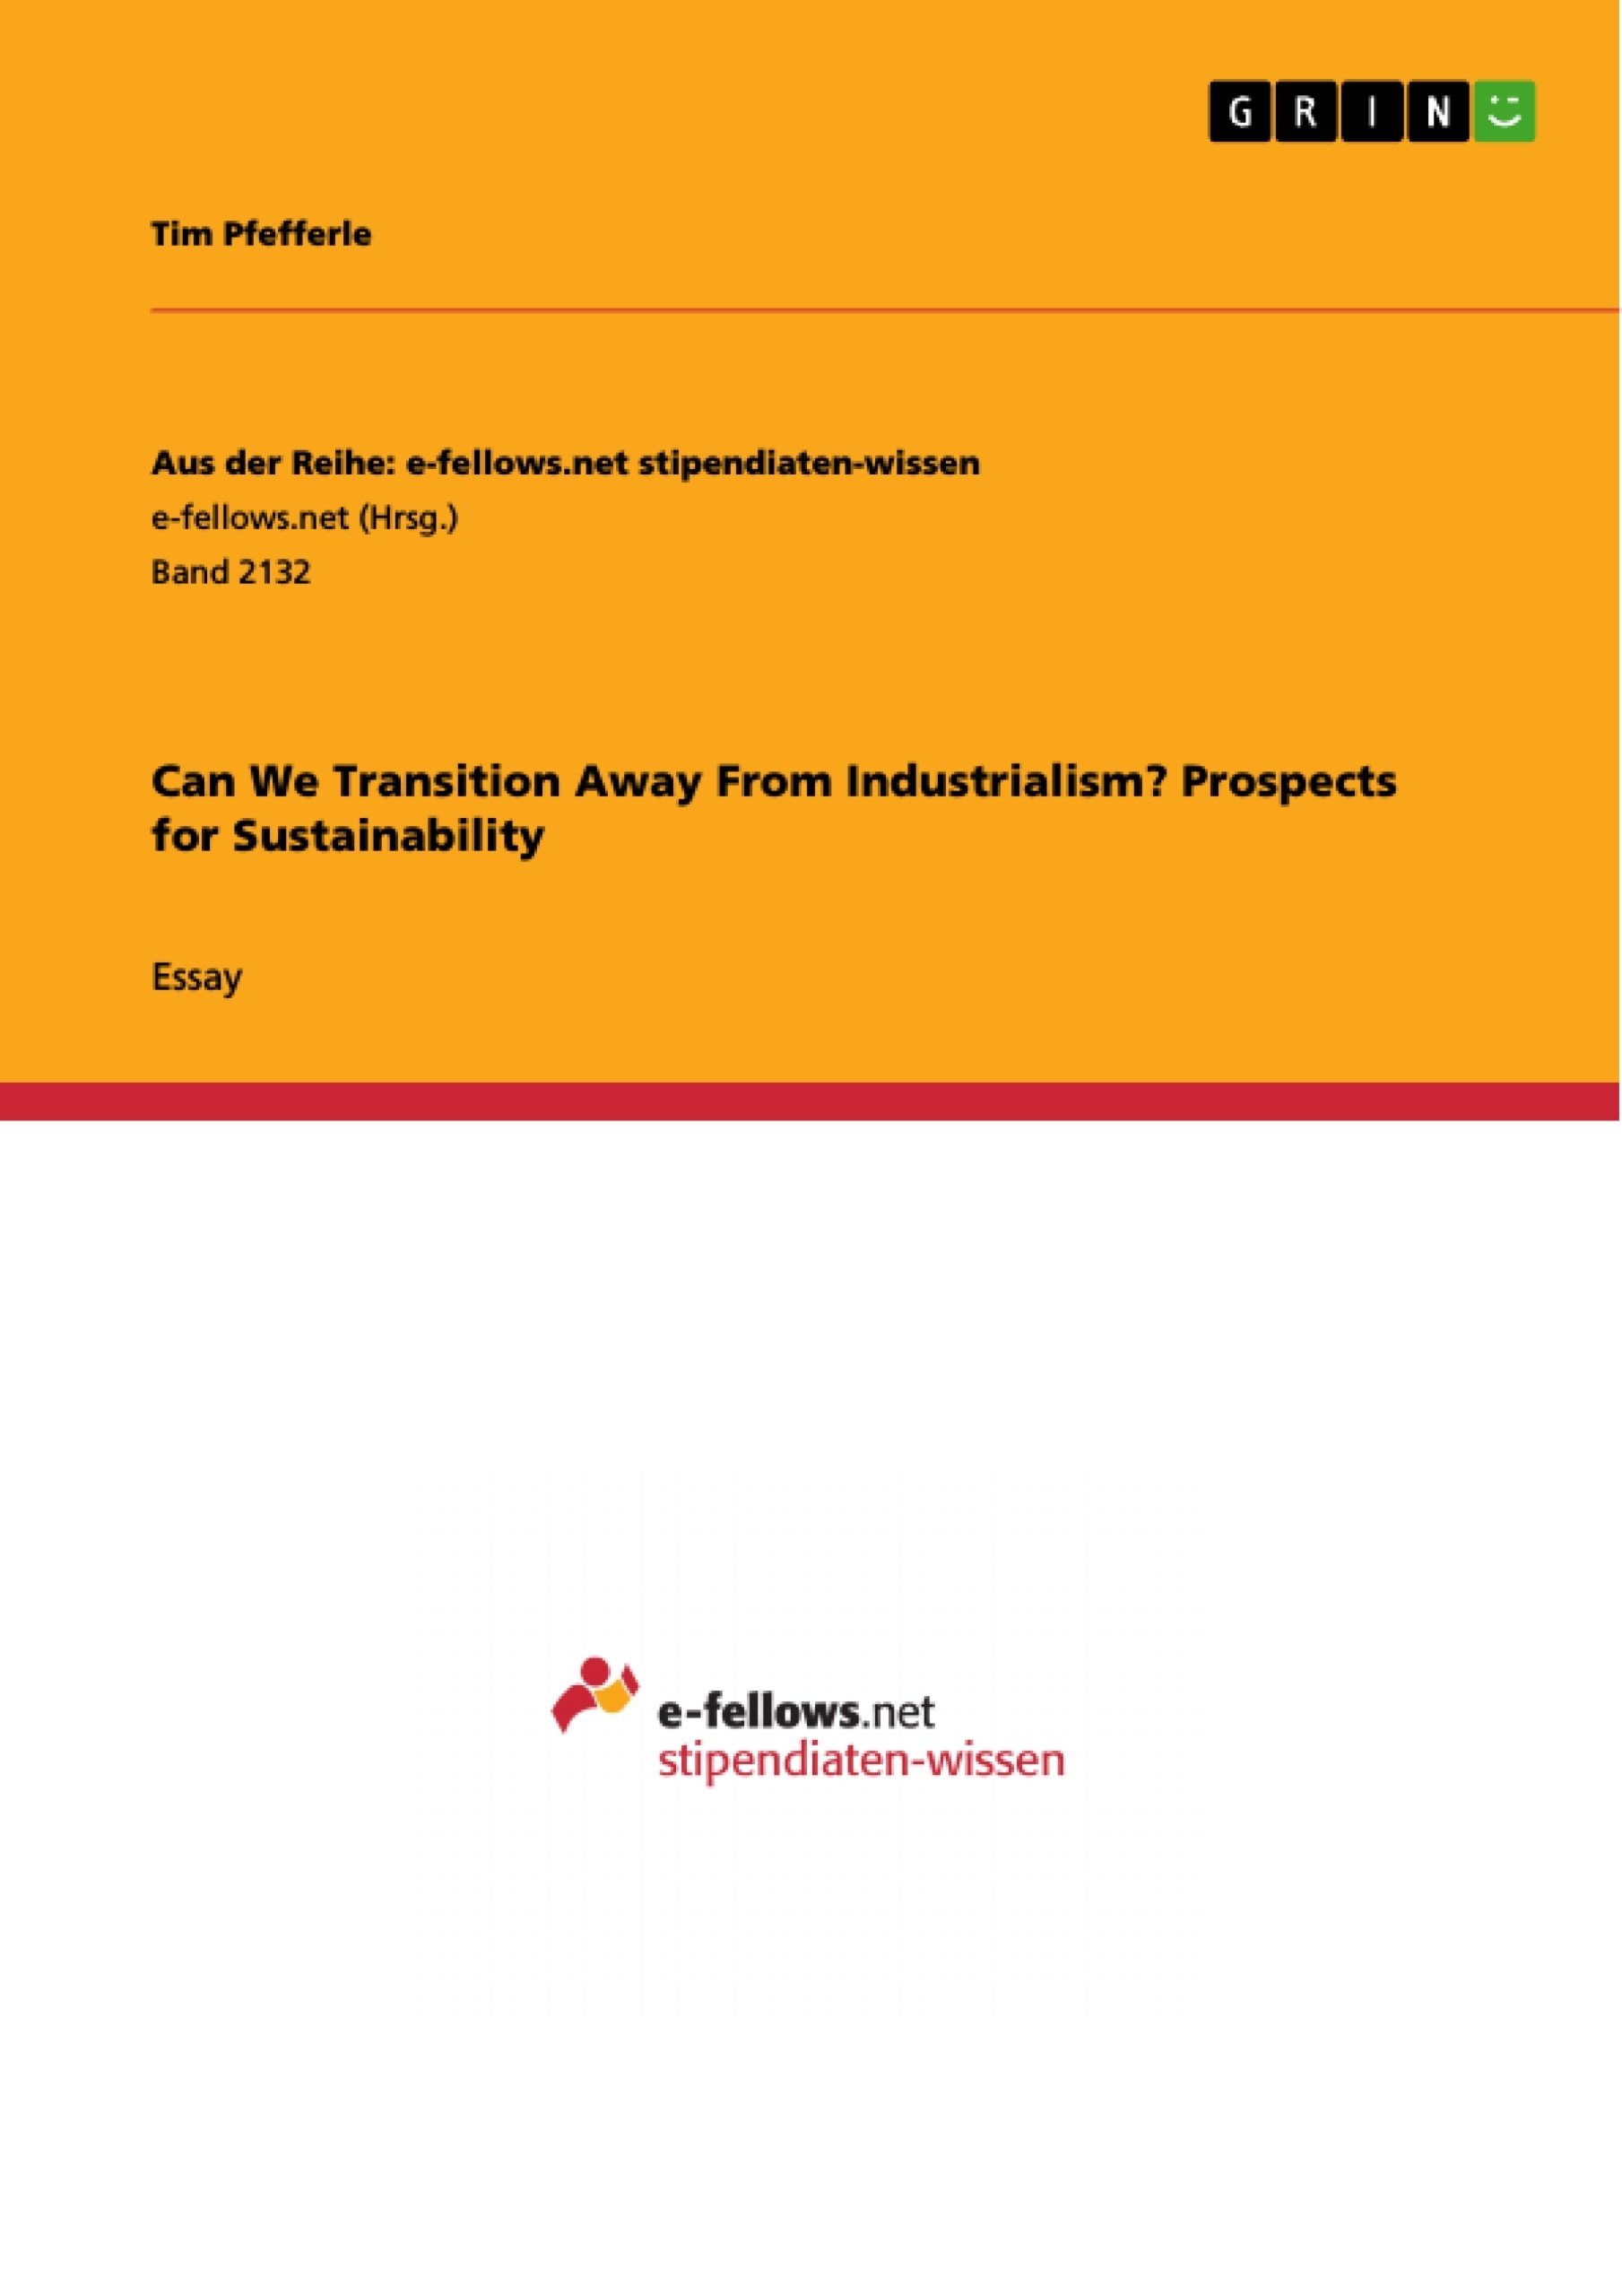 Título: Can We Transition Away From Industrialism? Prospects for Sustainability